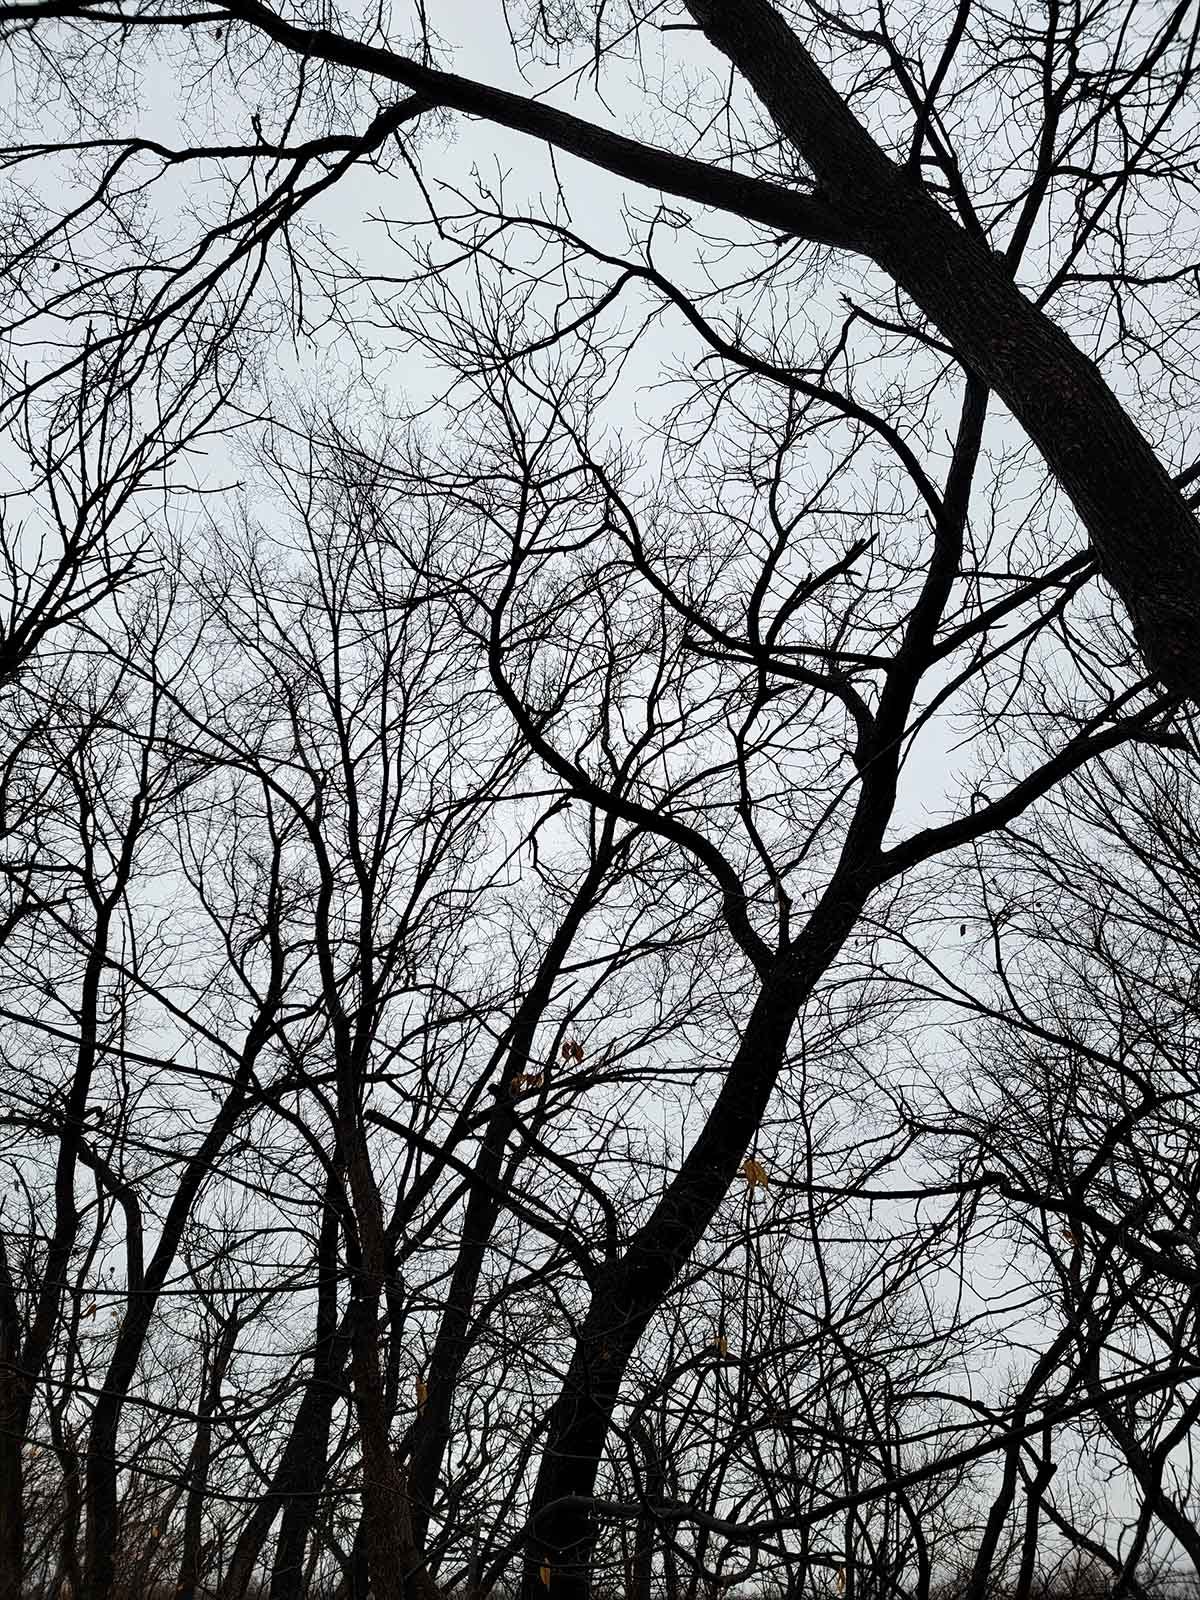 Trees in winter, with a gray sky. 